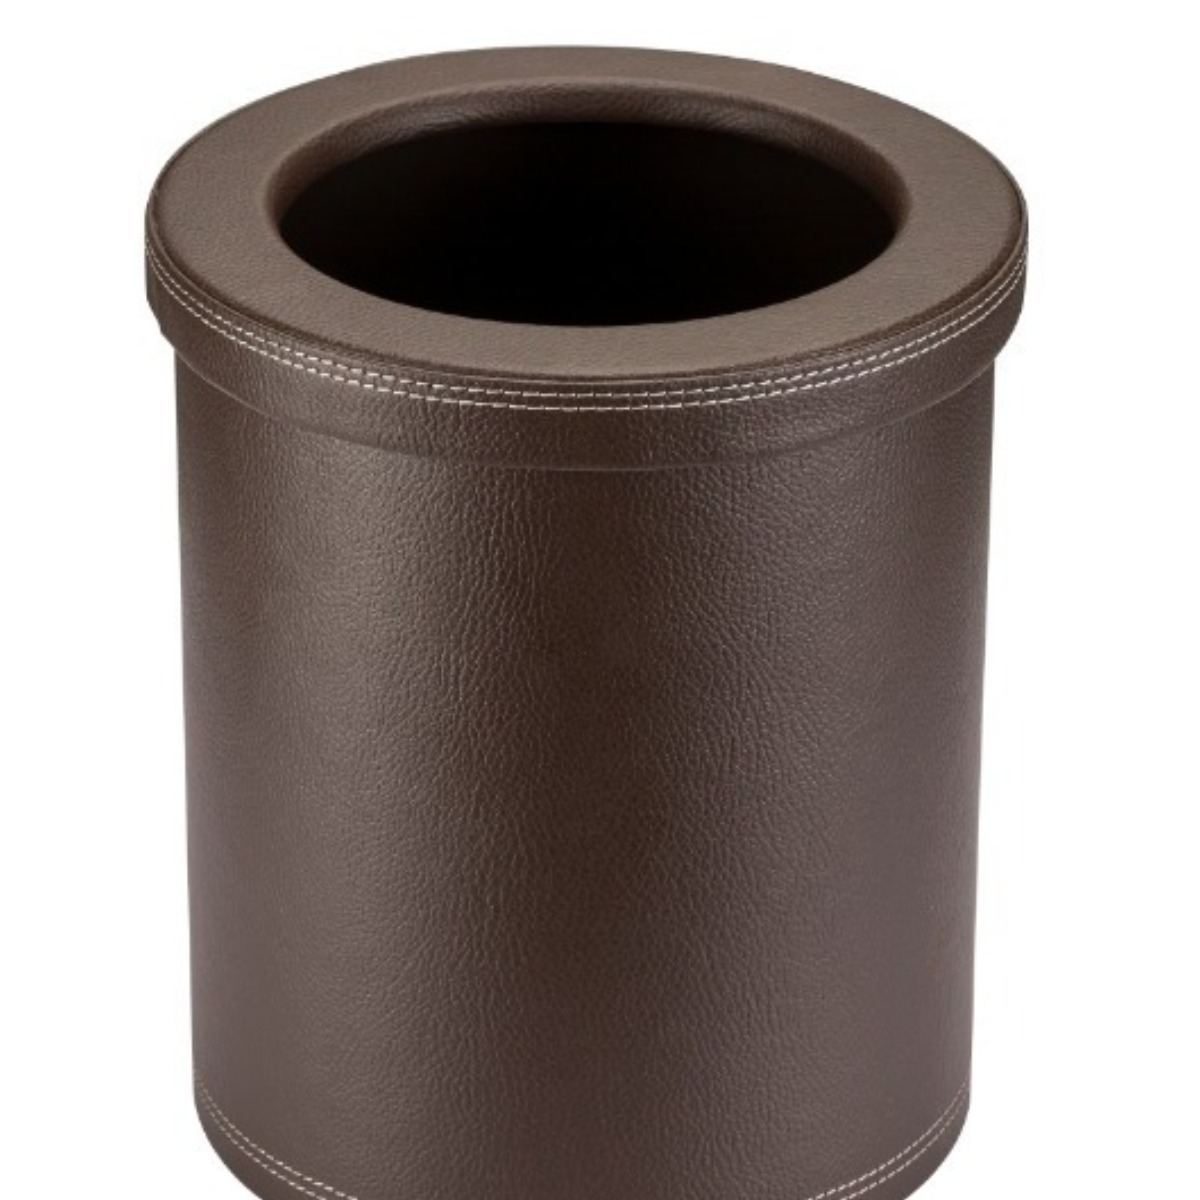 AB-312 Leather Lined Dustbin product logo